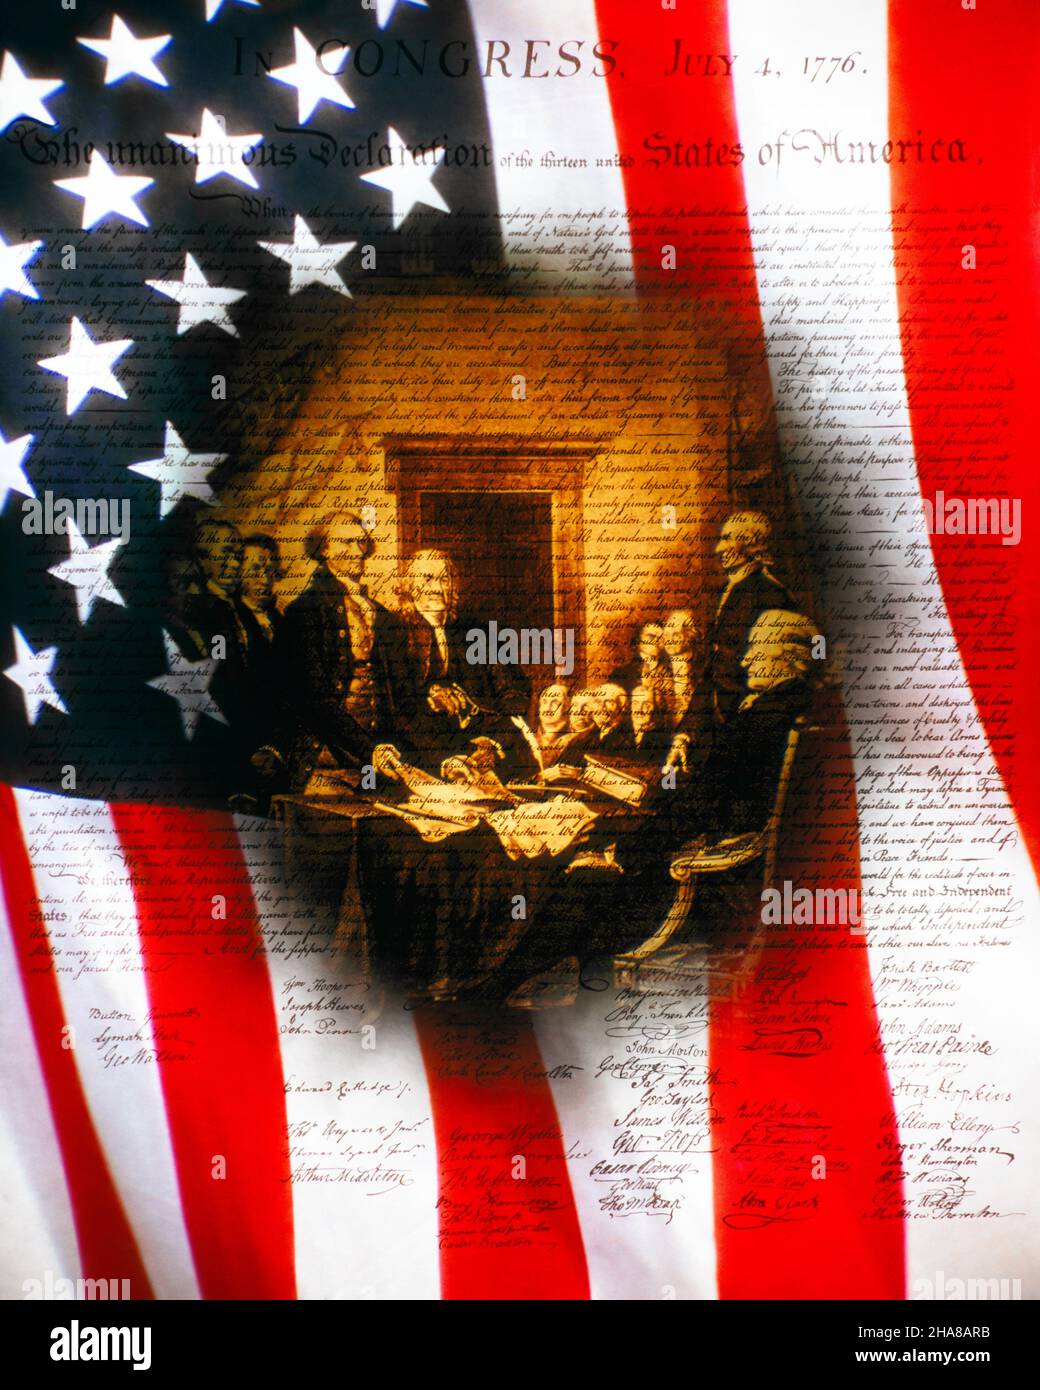 1970s 1770s COMPOSITE IMAGE OF THE SIGNING OF THE DECLARATION OF INDEPENDENCE THE DOCUMENT ITSELF AND THE AMERICAN FLAG  - kh5055 HAR001 HARS UNITED STATES OF AMERICA MALES RISK AMERICANA NORTH AMERICA FREEDOM NORTH AMERICAN SUCCESS WARS DOCUMENT IMAGE AND COMPOSITE EXCITEMENT LEADERSHIP PA PRIDE OPPORTUNITY 1776 AUTHORITY POLITICS WAR OF INDEPENDENCE SIGNERS CONCEPTUAL STARS AND STRIPES REVOLT AMERICAN REVOLUTIONARY WAR OLD GLORY 1770s COLONIES COOPERATION RED WHITE AND BLUE SIGNATURES CITY OF BROTHERLY LOVE CONTINENTAL CONGRESS DECLARATION OF INDEPENDENCE FEDERAL FOUNDING FATHERS Stock Photo